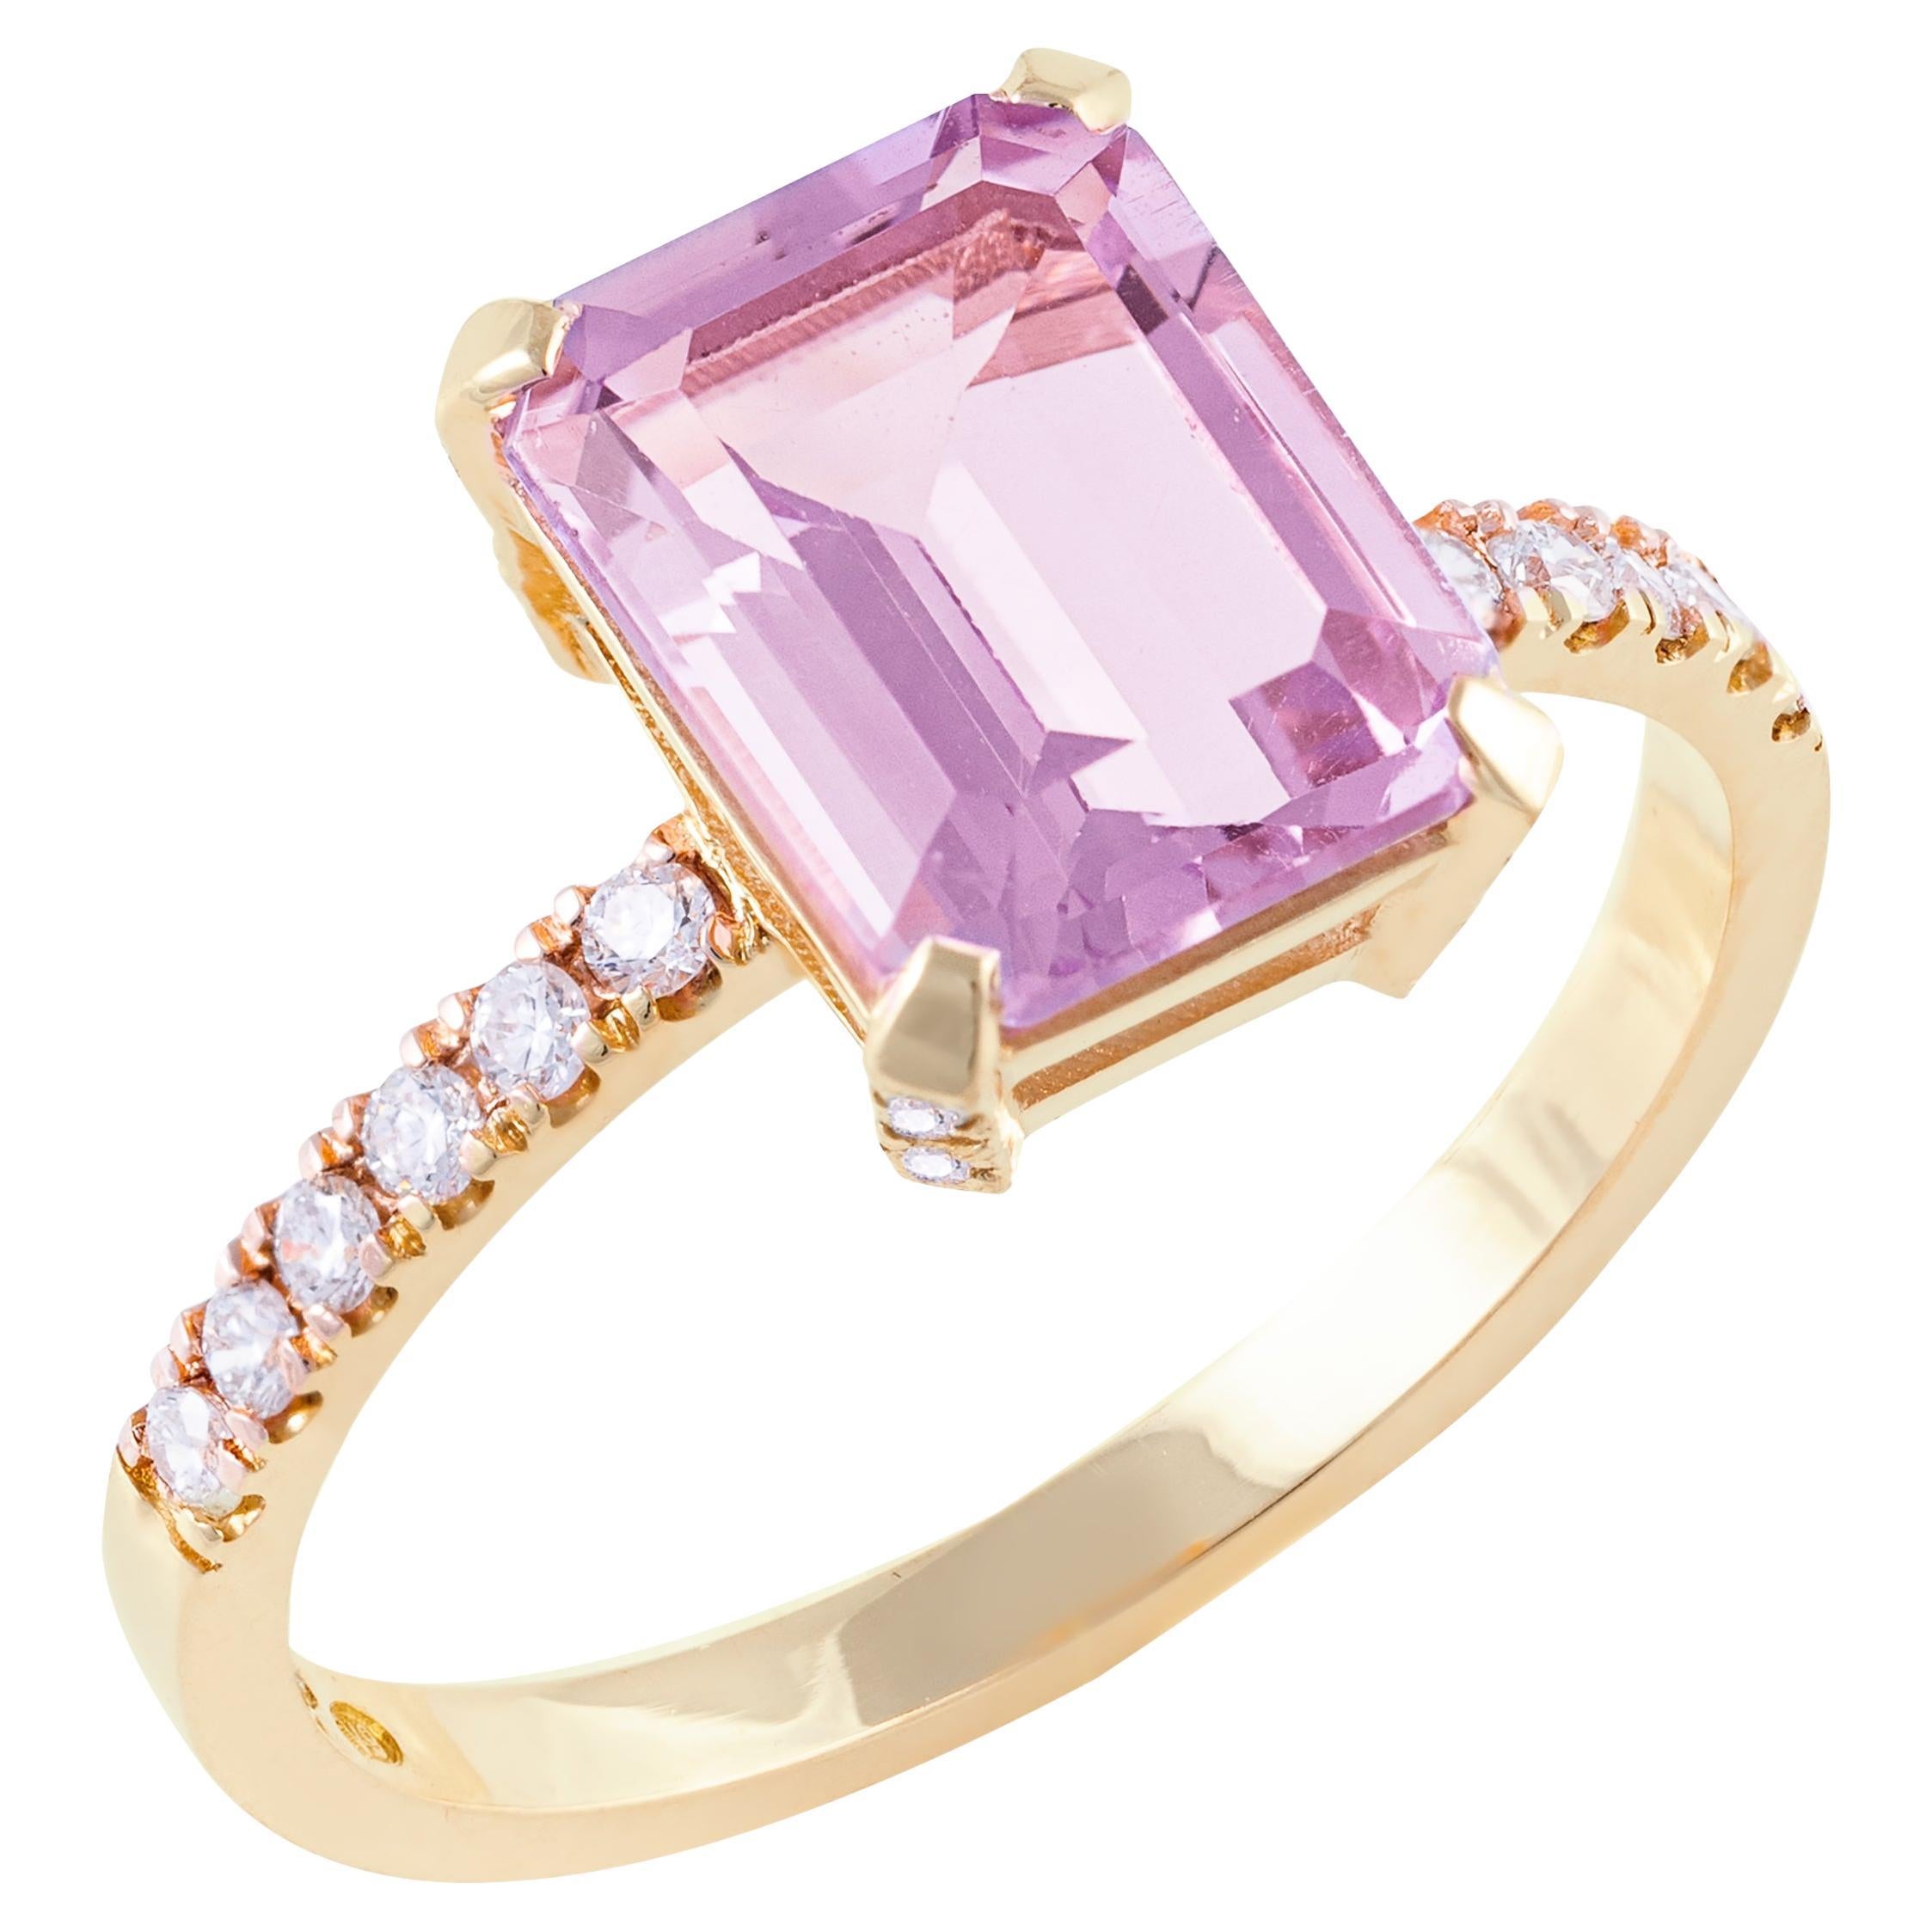 Natalina Jewellery Pink Amethyst and Diamond Rose Gold Cocktail Ring